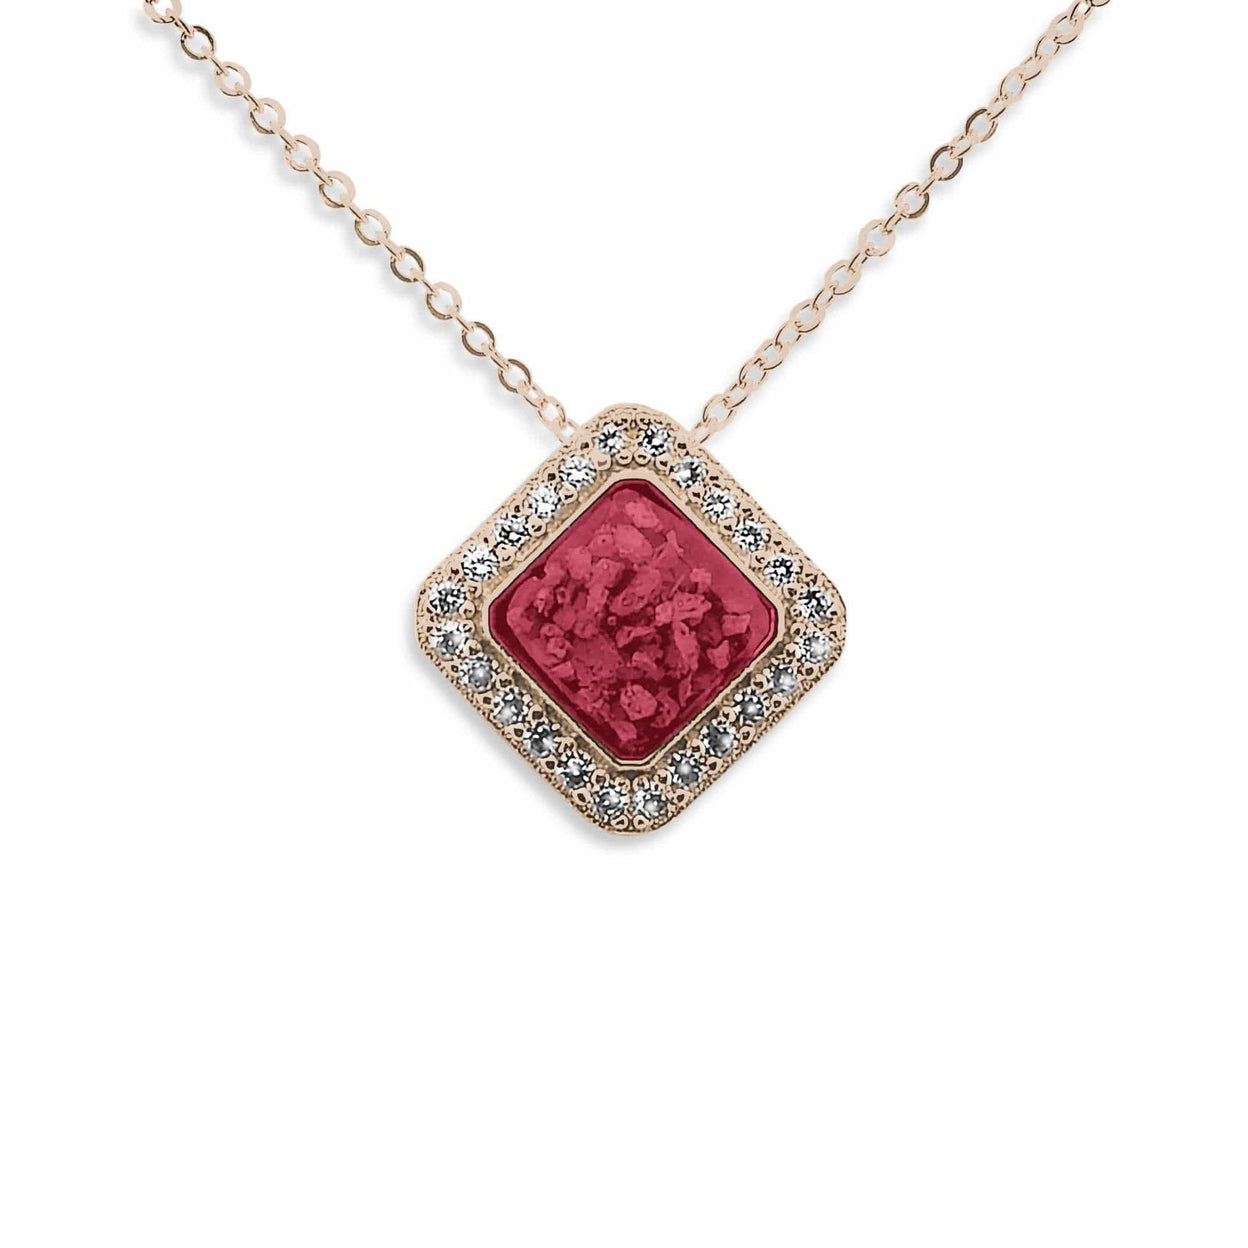 Load image into Gallery viewer, EverWith Ladies Bless Memorial Ashes Pendant with Fine Crystals